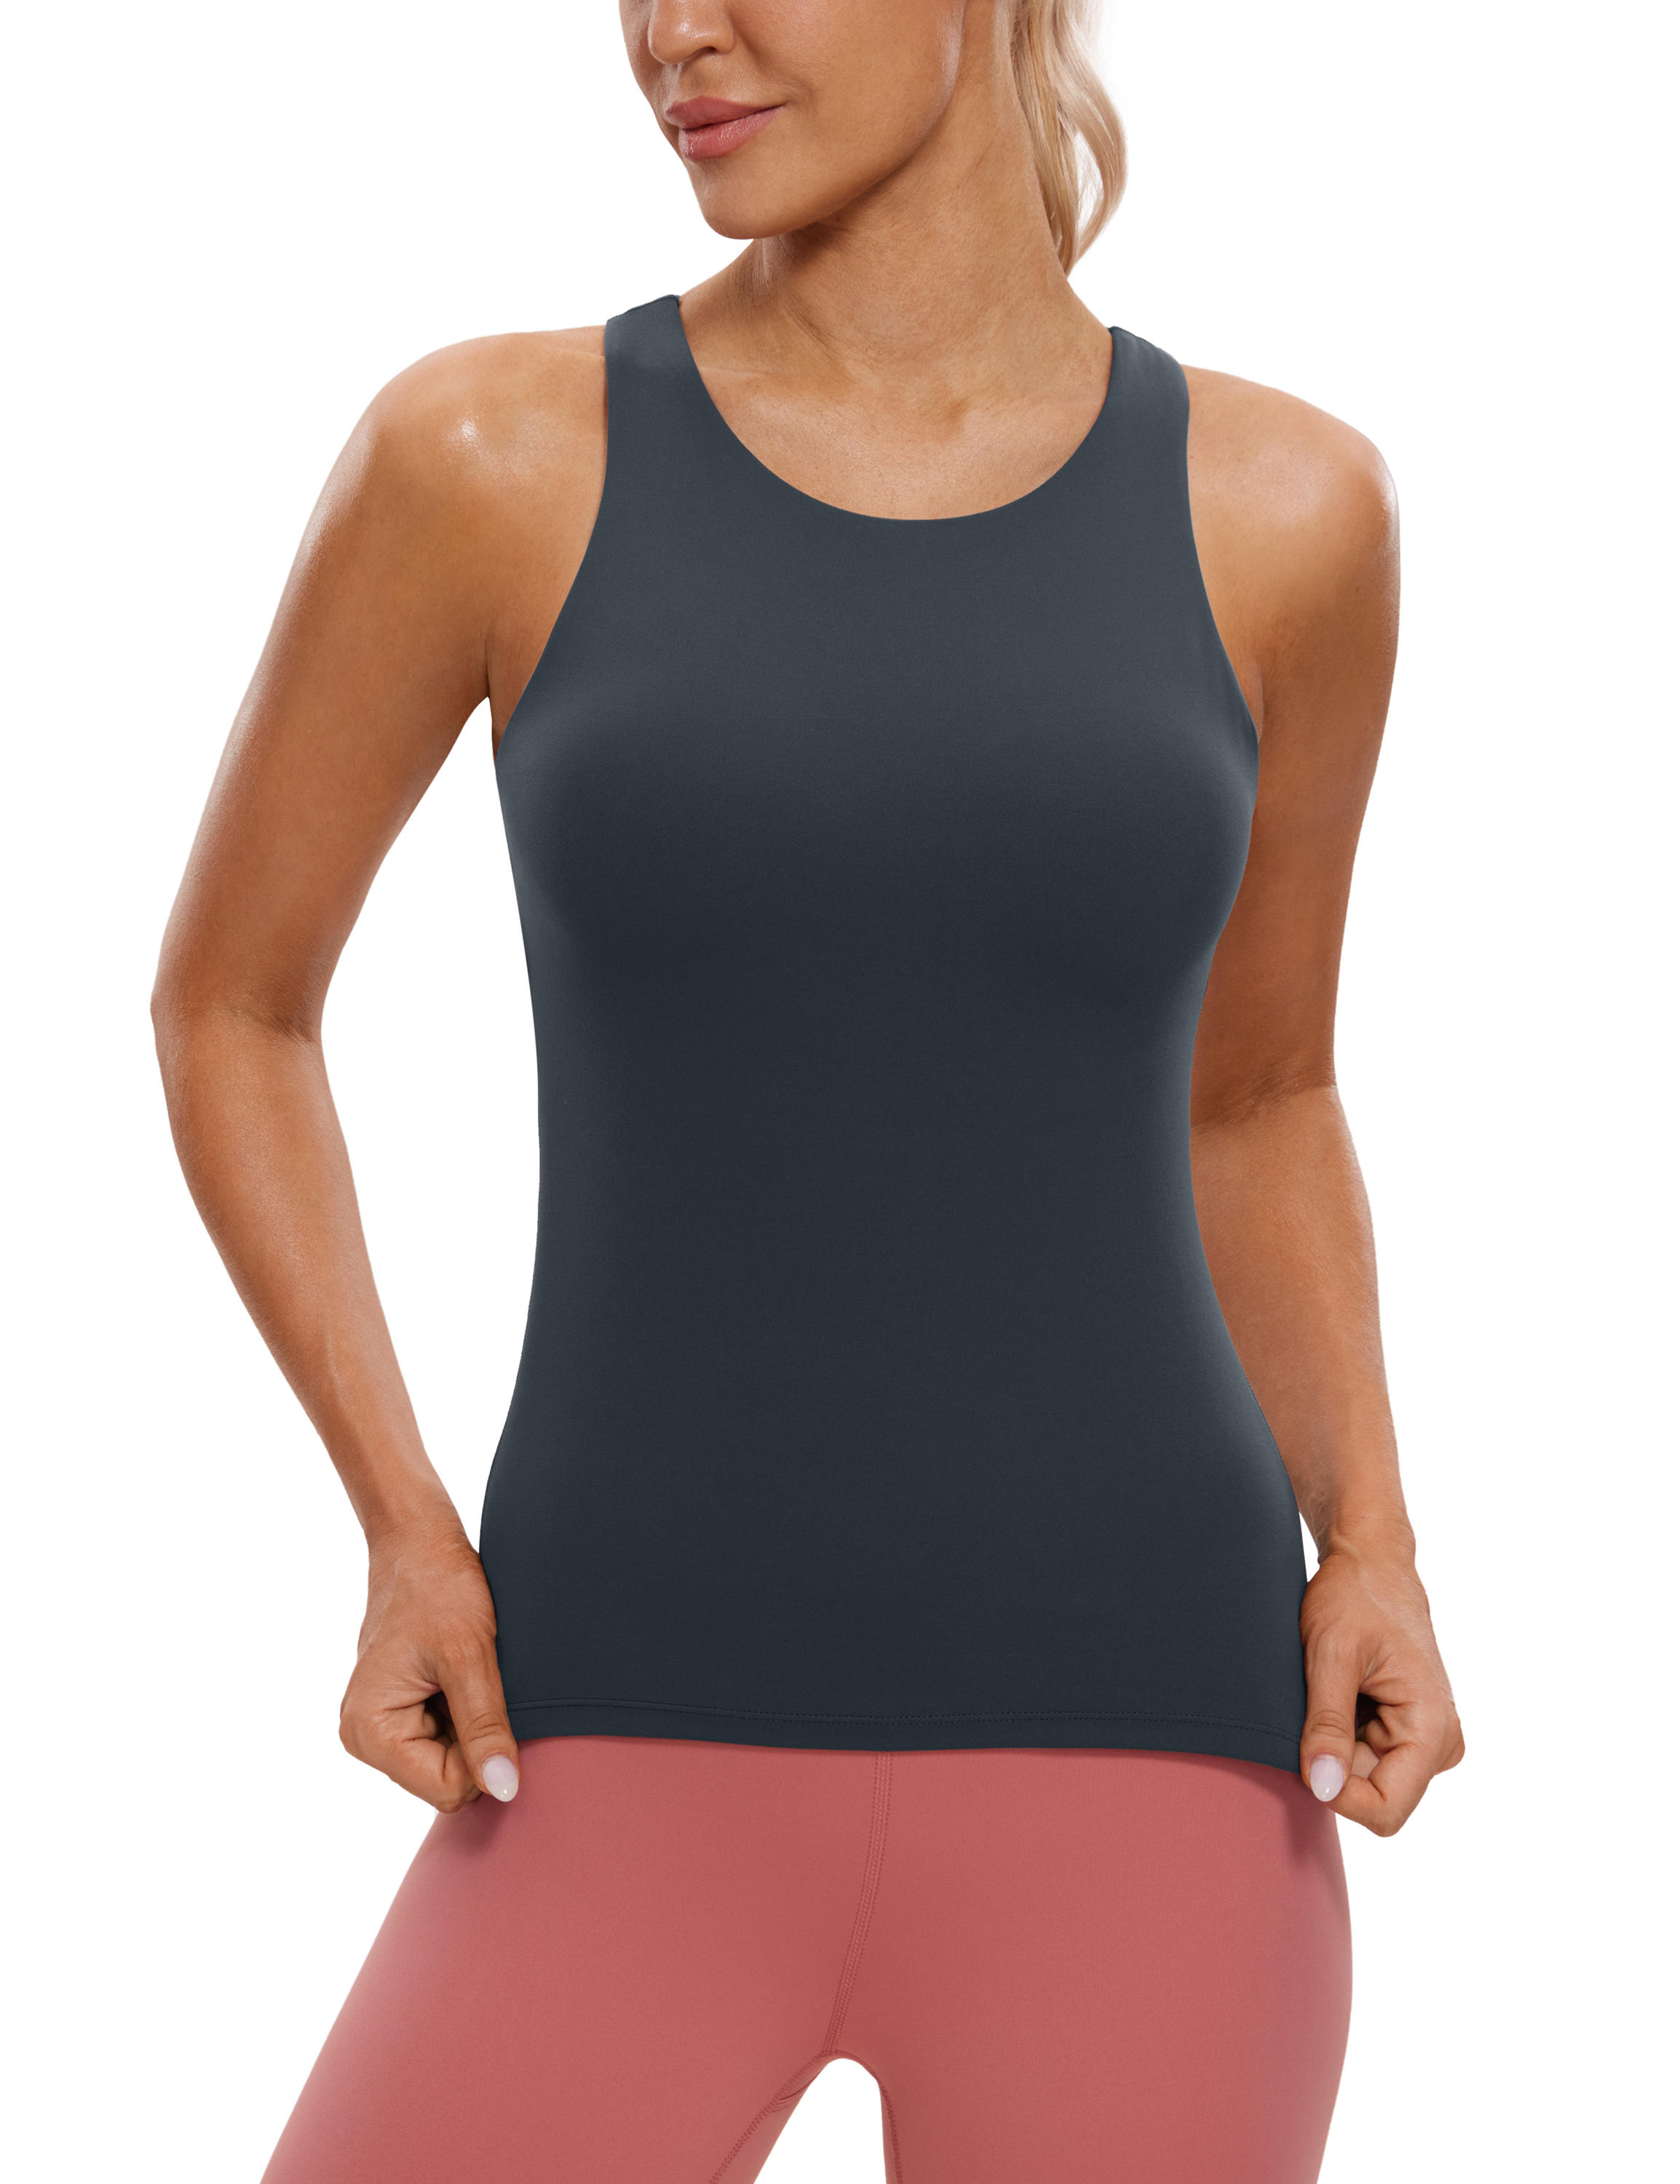 Butterluxe Womens V Neck Workout Tank Tops with Built in Bras - Sleeveless  Padded Racerback Yoga Athletic Camisole 